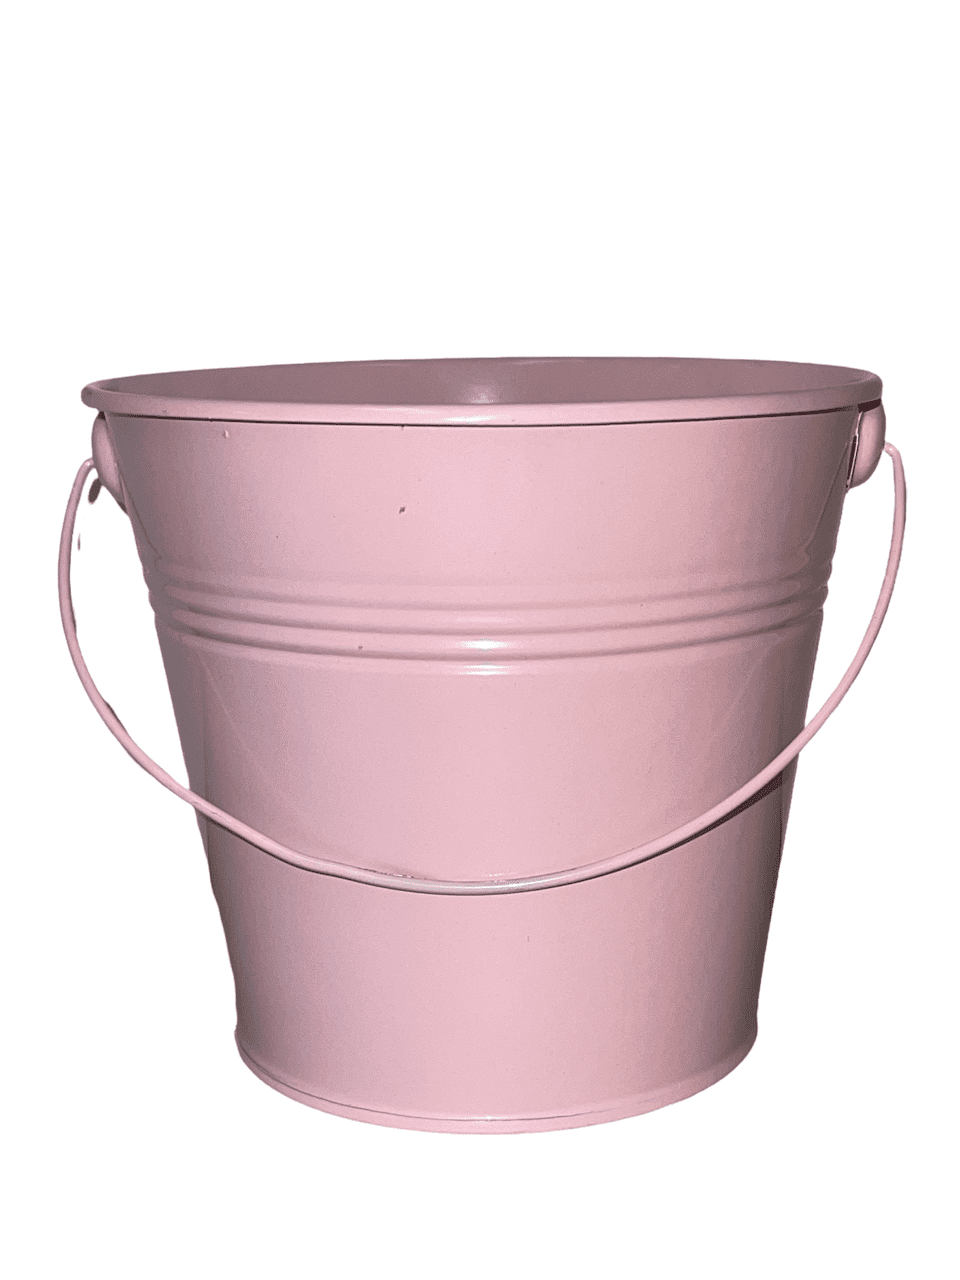 Small Metal Buckets, Colored Galvanized Tinplate Tin Pails with Handles for  Garden Container, Packaging Barrels - China Small Metal Buckets, Metal  Buckets